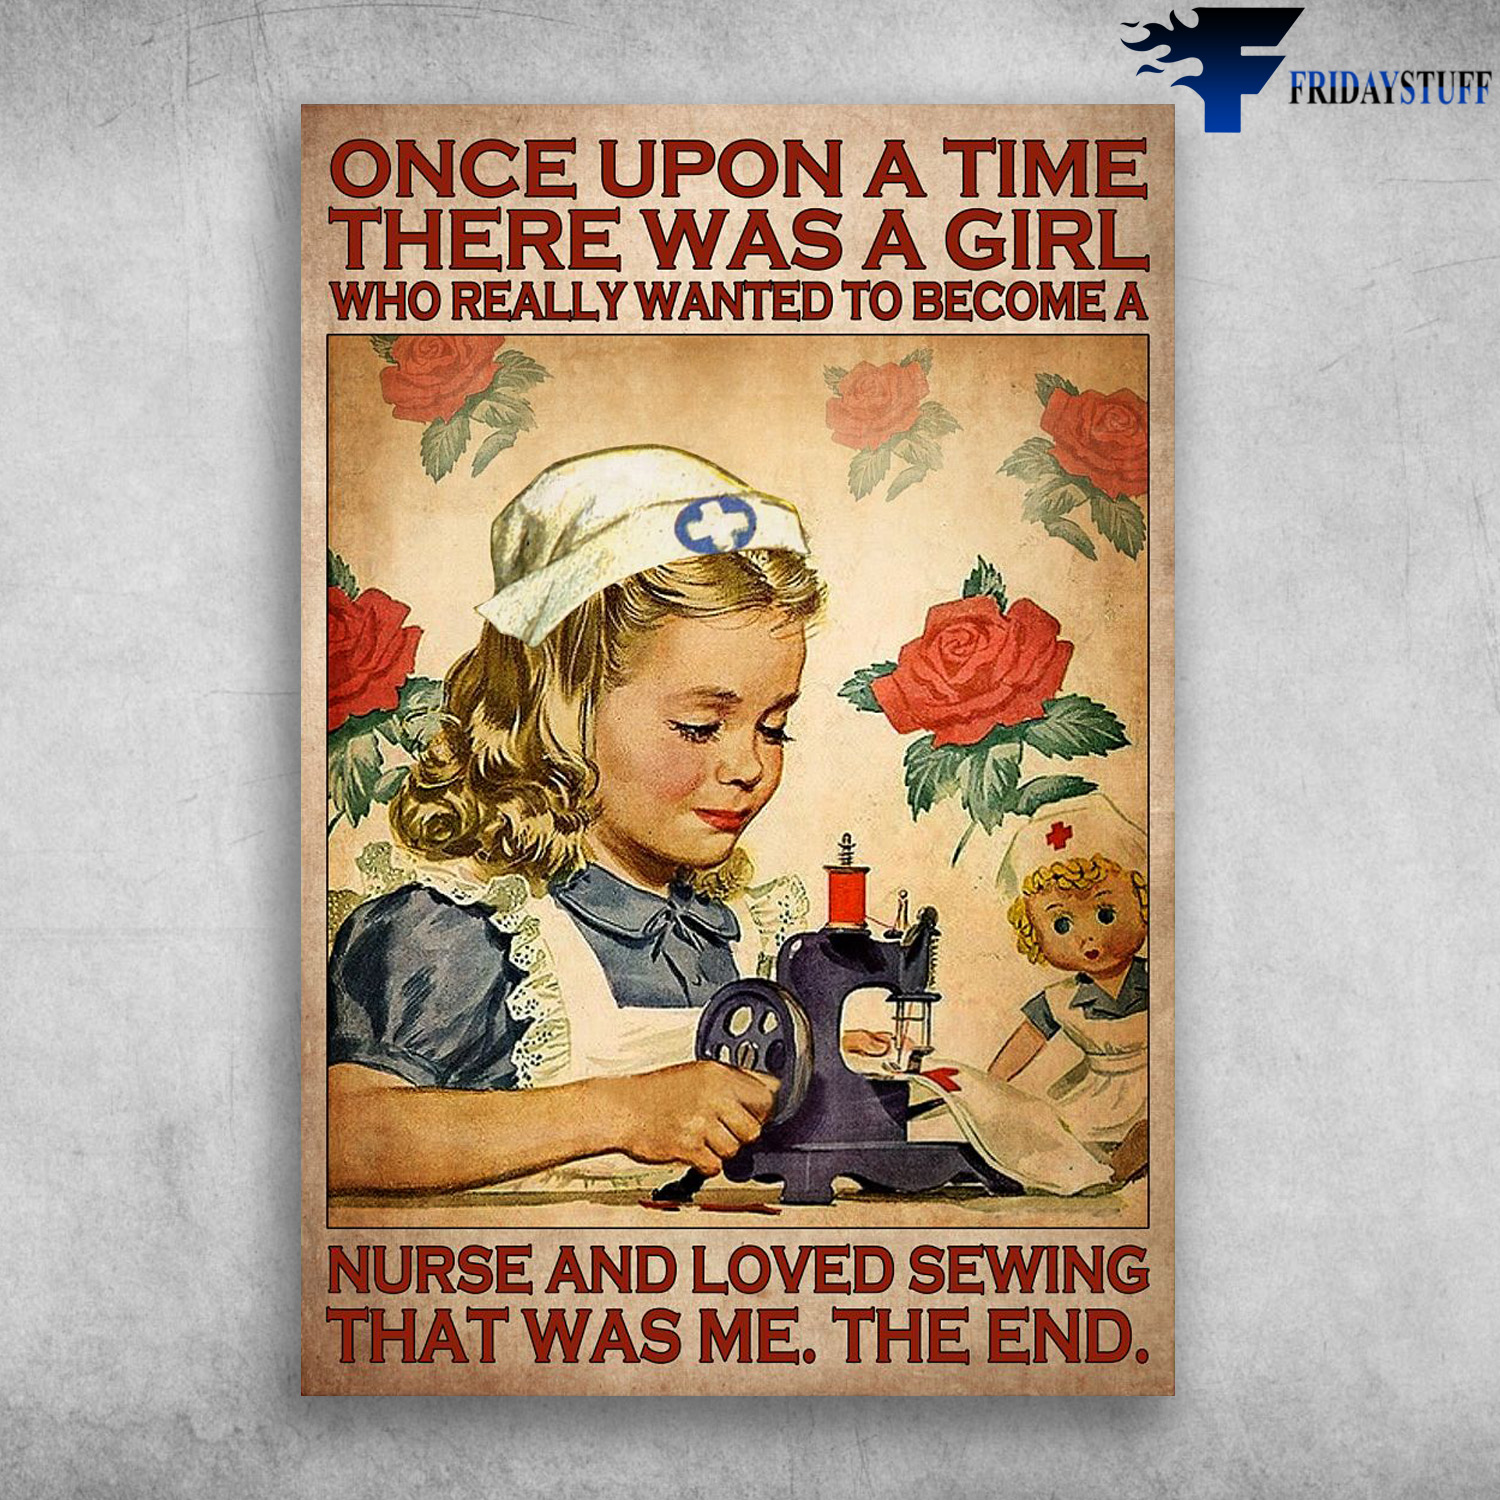 Little Girl Nurse Sewing - Once Upon A Time, There Was A Girl, Who Really Wanted To Be Come A Nurse, And Loved Sewing, Is Was Me, The End